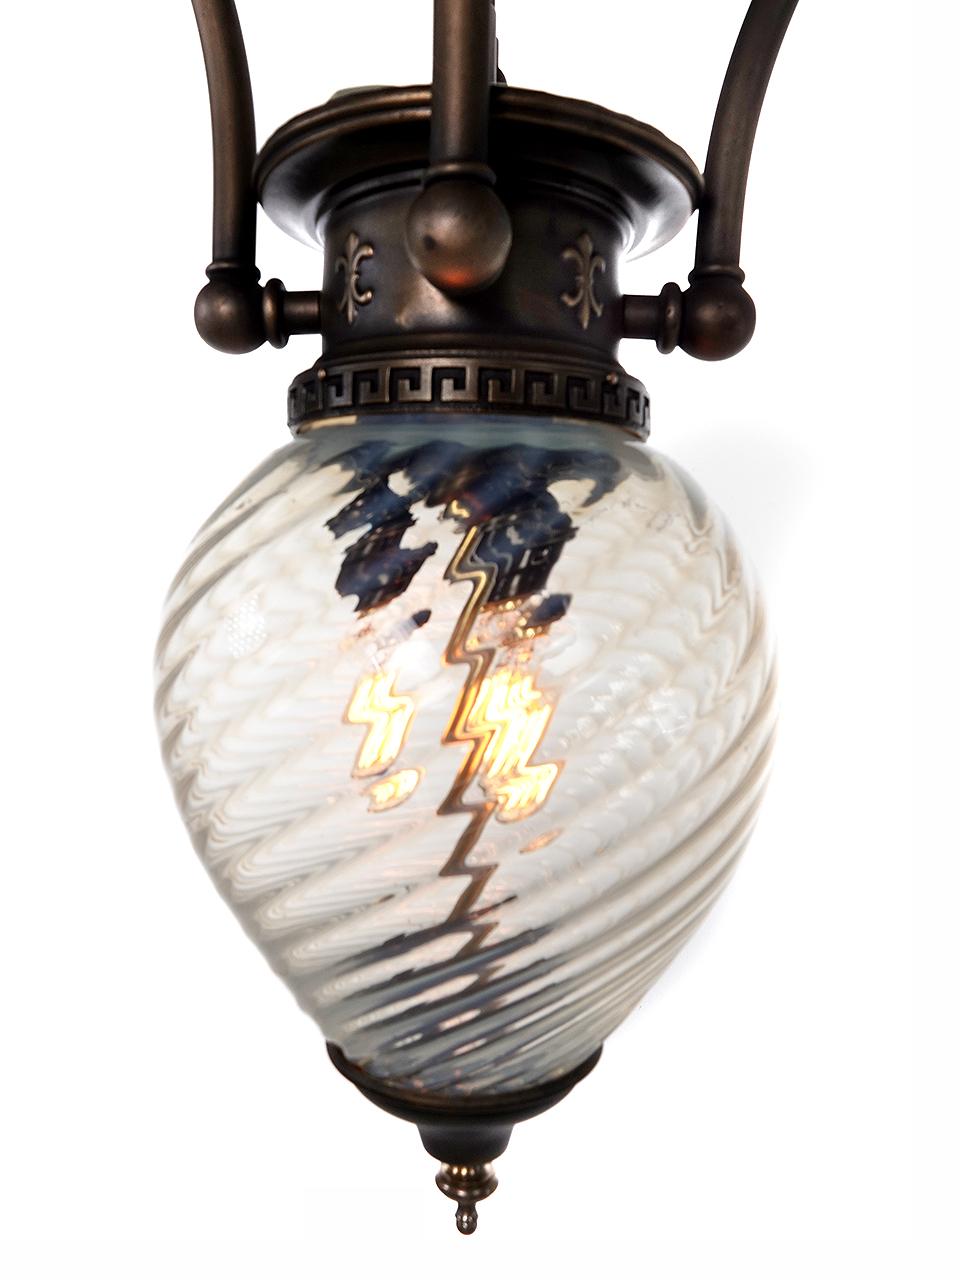 It's rare when you have the chance to purchase objects from an individual's life long collection. The depth of knowledge and network of this important collector/expert can't be duplicated. We had the opportunity to see these lamps first-hand and